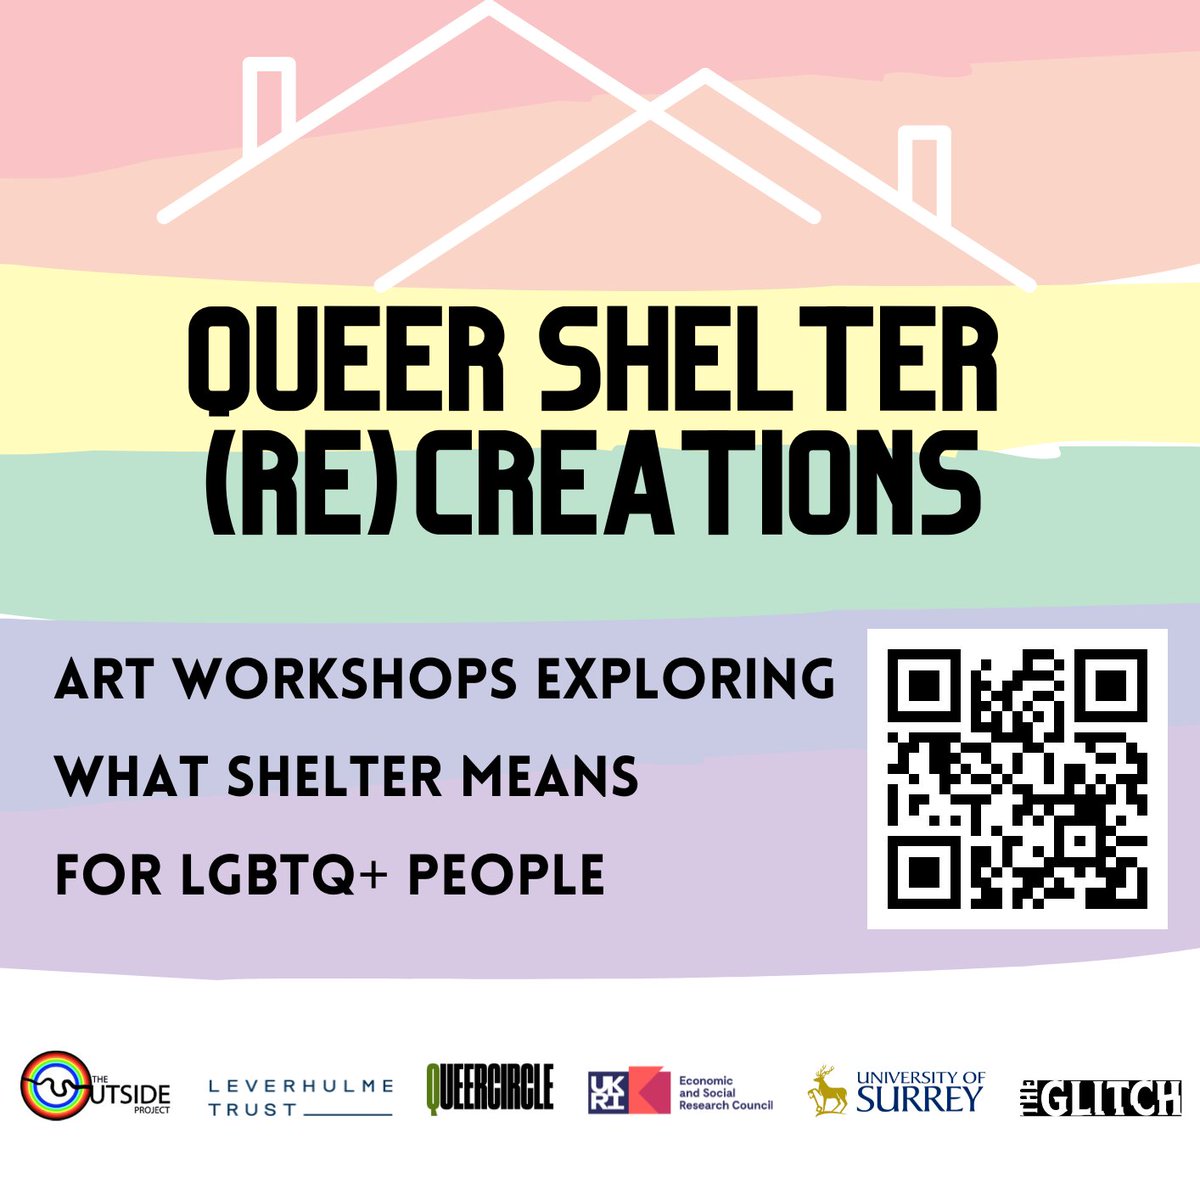 NEWS! We're working with London artists to put on 4 creative workshops in March on what shelter means for LGBTQ+ people. Come & create your own STREET ART, poetry, ZINES & more. Booking now open. eventbrite.com/e/queer-shelte…

#lgbtq #queerlondon #queerart #queerstreetart #queerzines